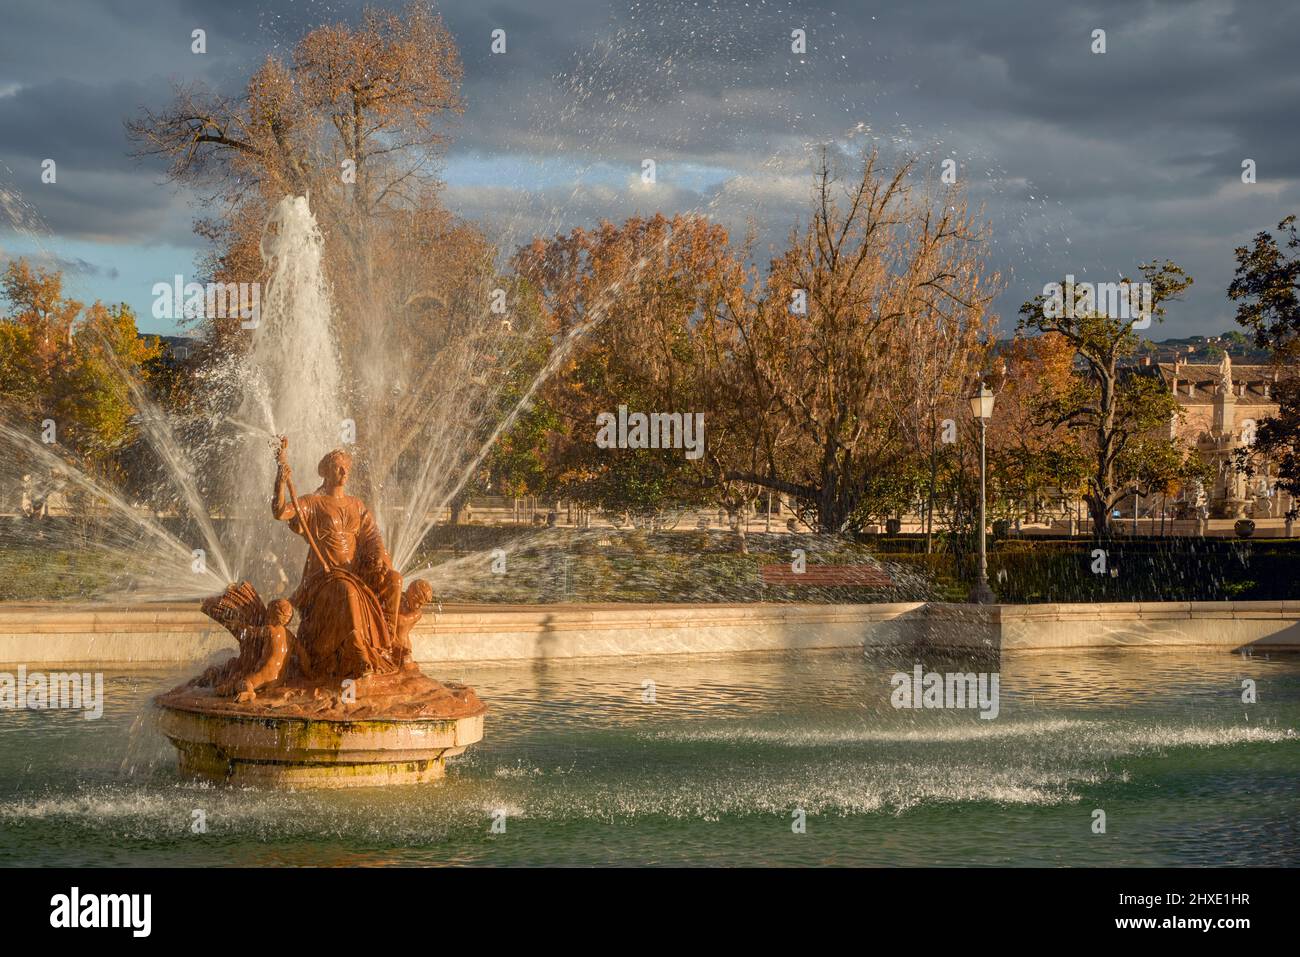 Fountain of Ceres goddess protector of agriculture in the Garden of the Parterre, symbolizes the richness of the orchard of Aranjuez. Madrid, Europe Stock Photo